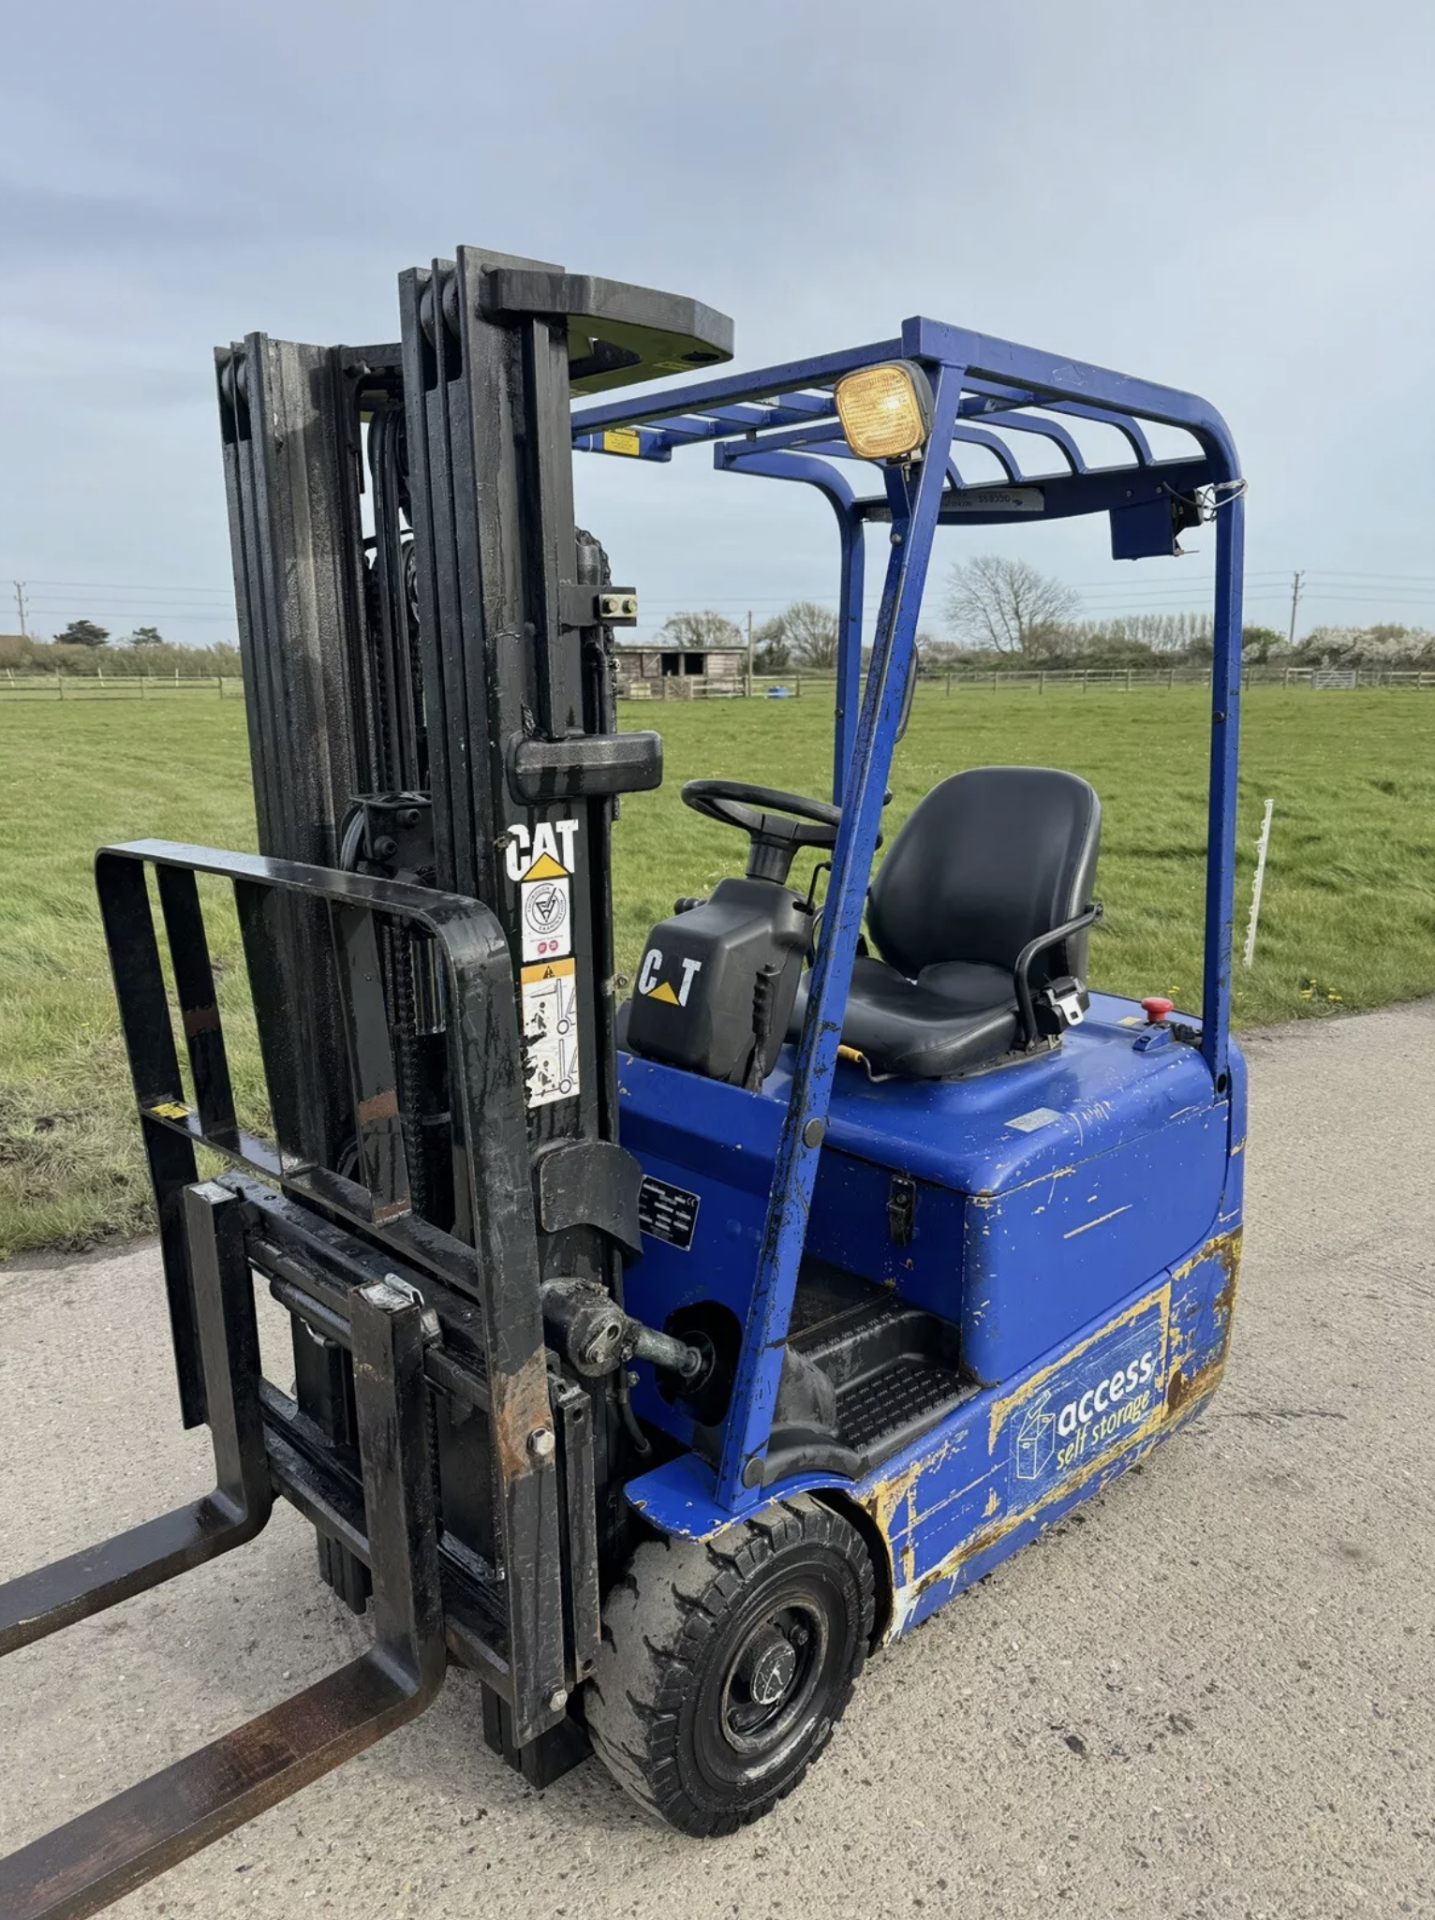 CATERPILLAR, 1.5 - Electric Forklift Truck (Container Spec)